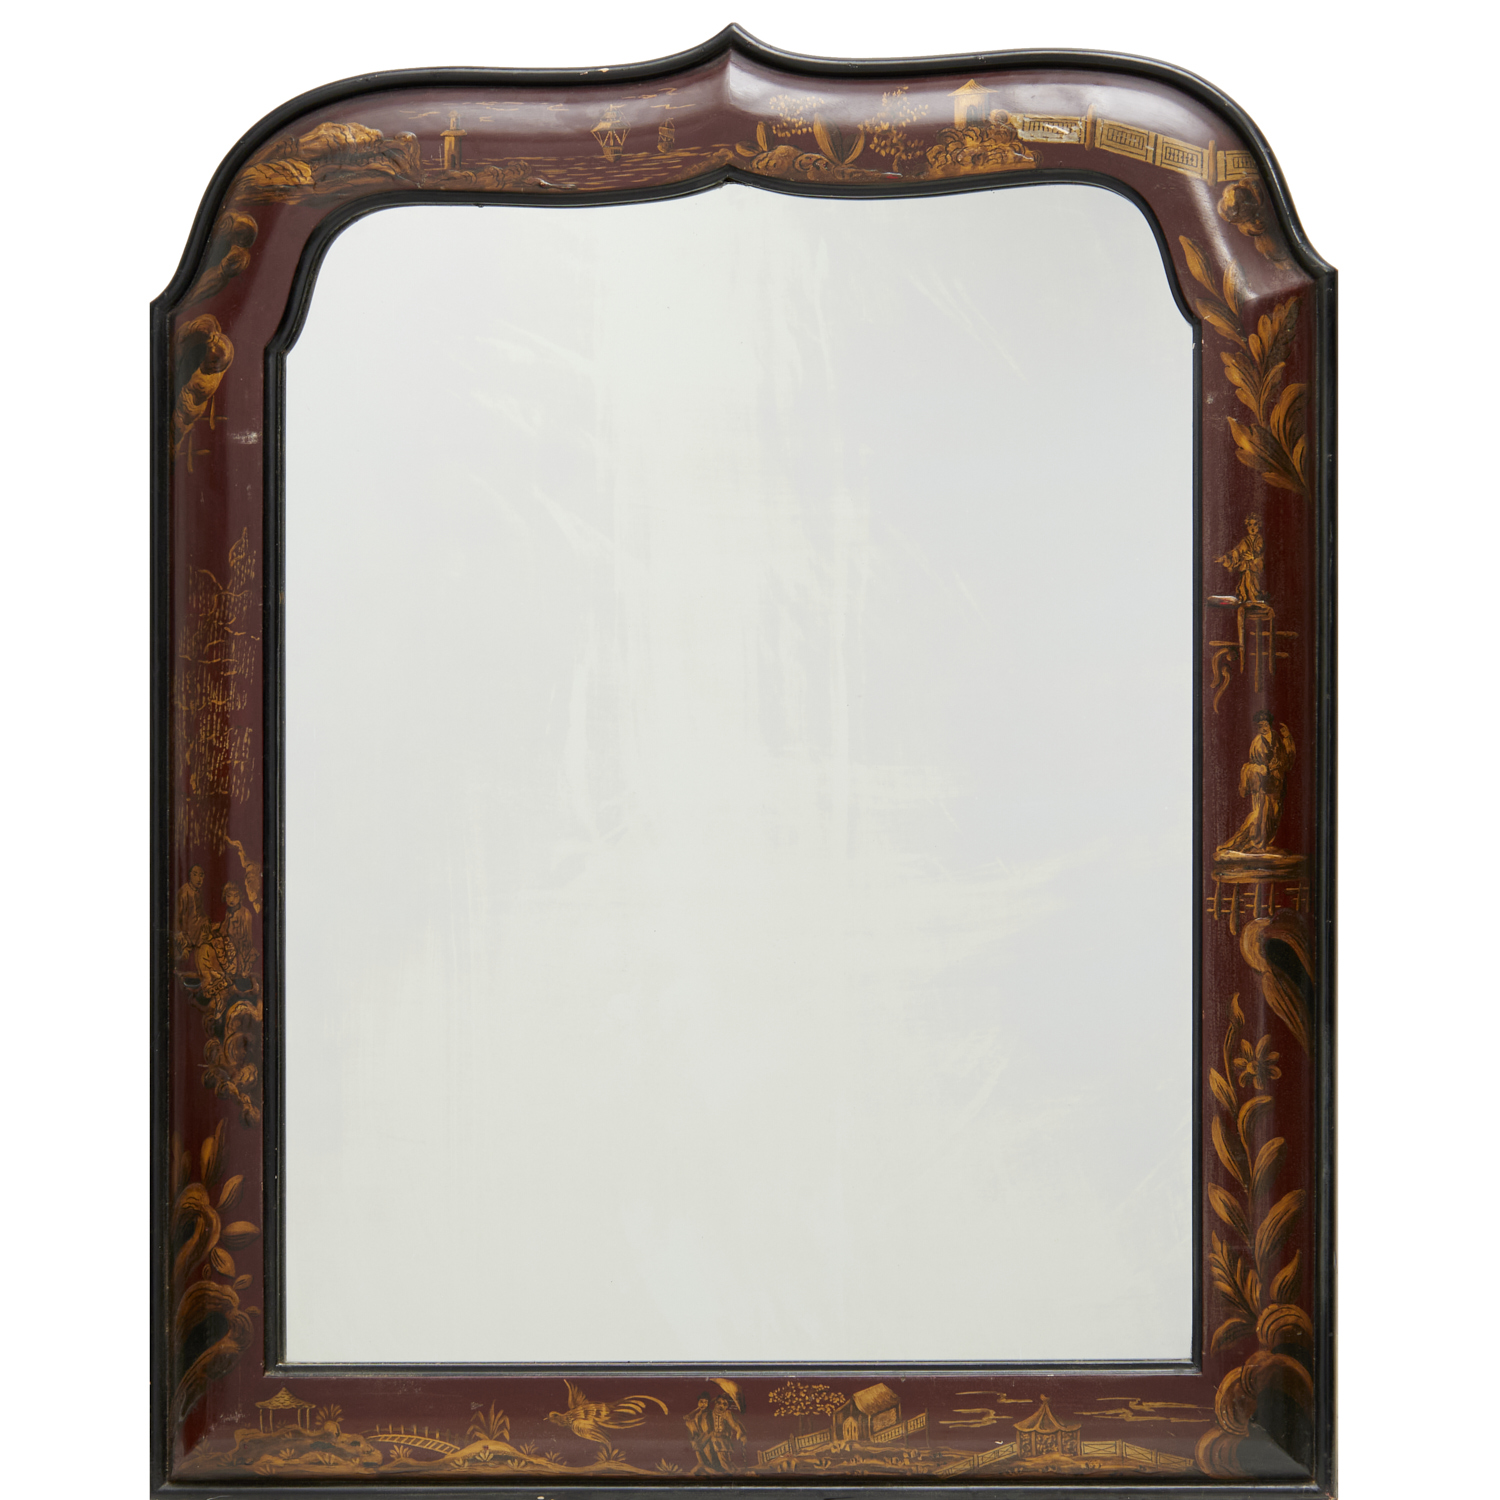 QUEEN ANNE STYLE CHINOISERIE LACQUERED 360204